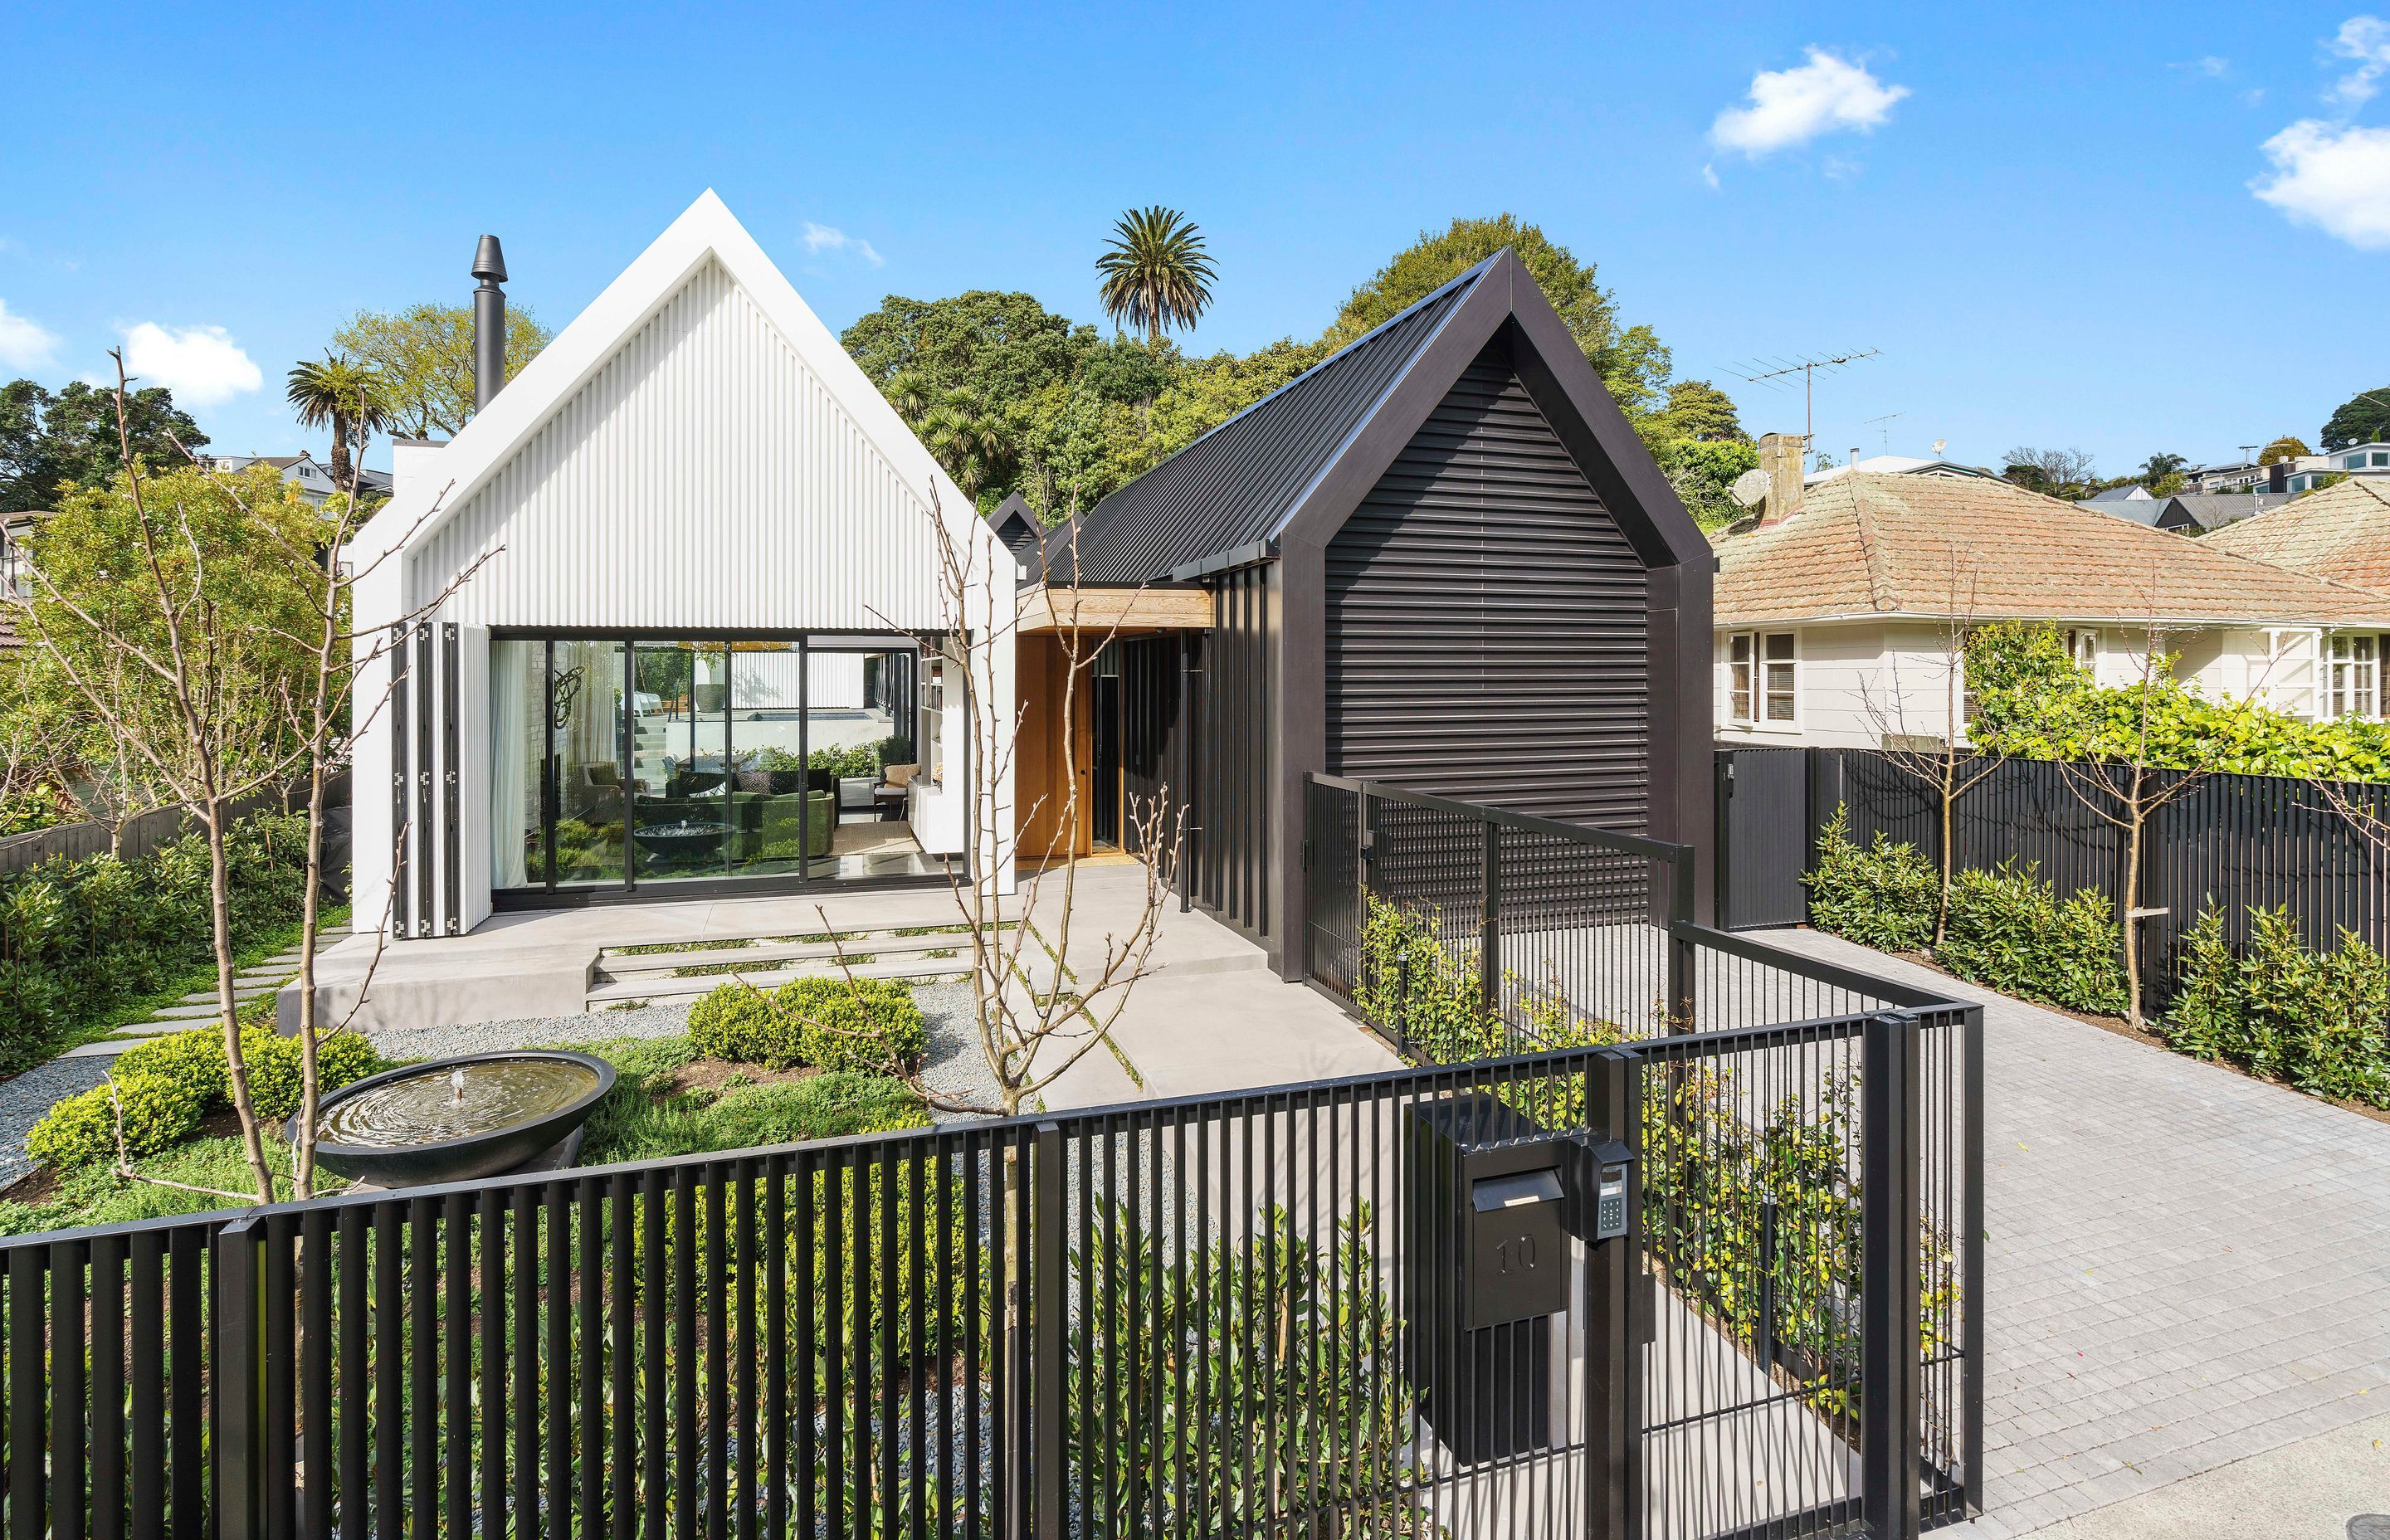 Reading as two striking pavilions from the road, this new home in the Auckland suburb of Remuera features various living zones that wrap around a large courtyard with tiled pool.